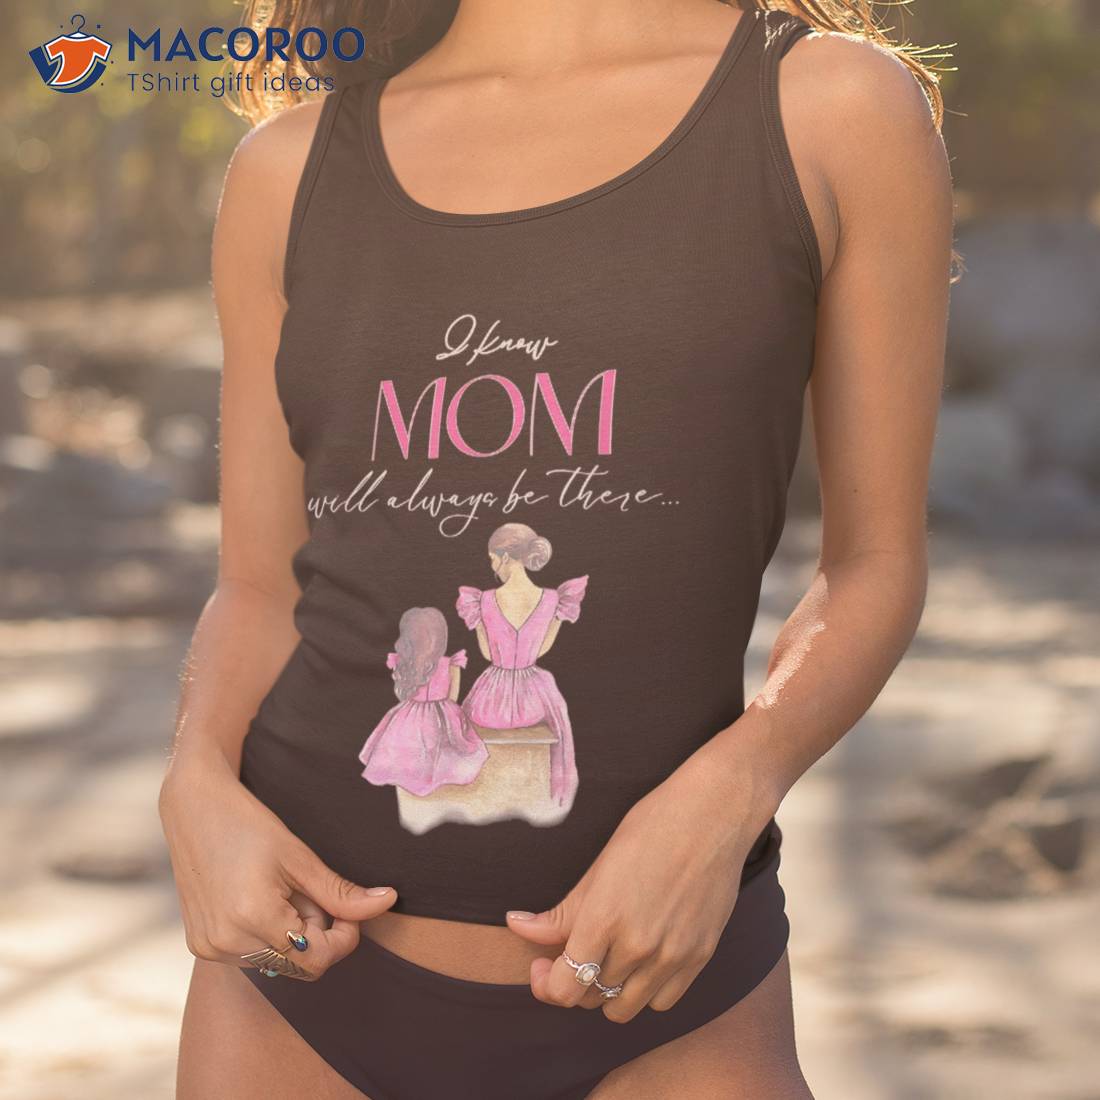 https://images.macoroo.com/wp-content/uploads/2023/05/ladies-super-mom-great-mother-s-day-gifts-for-shirt-tank-top-1-1.jpg